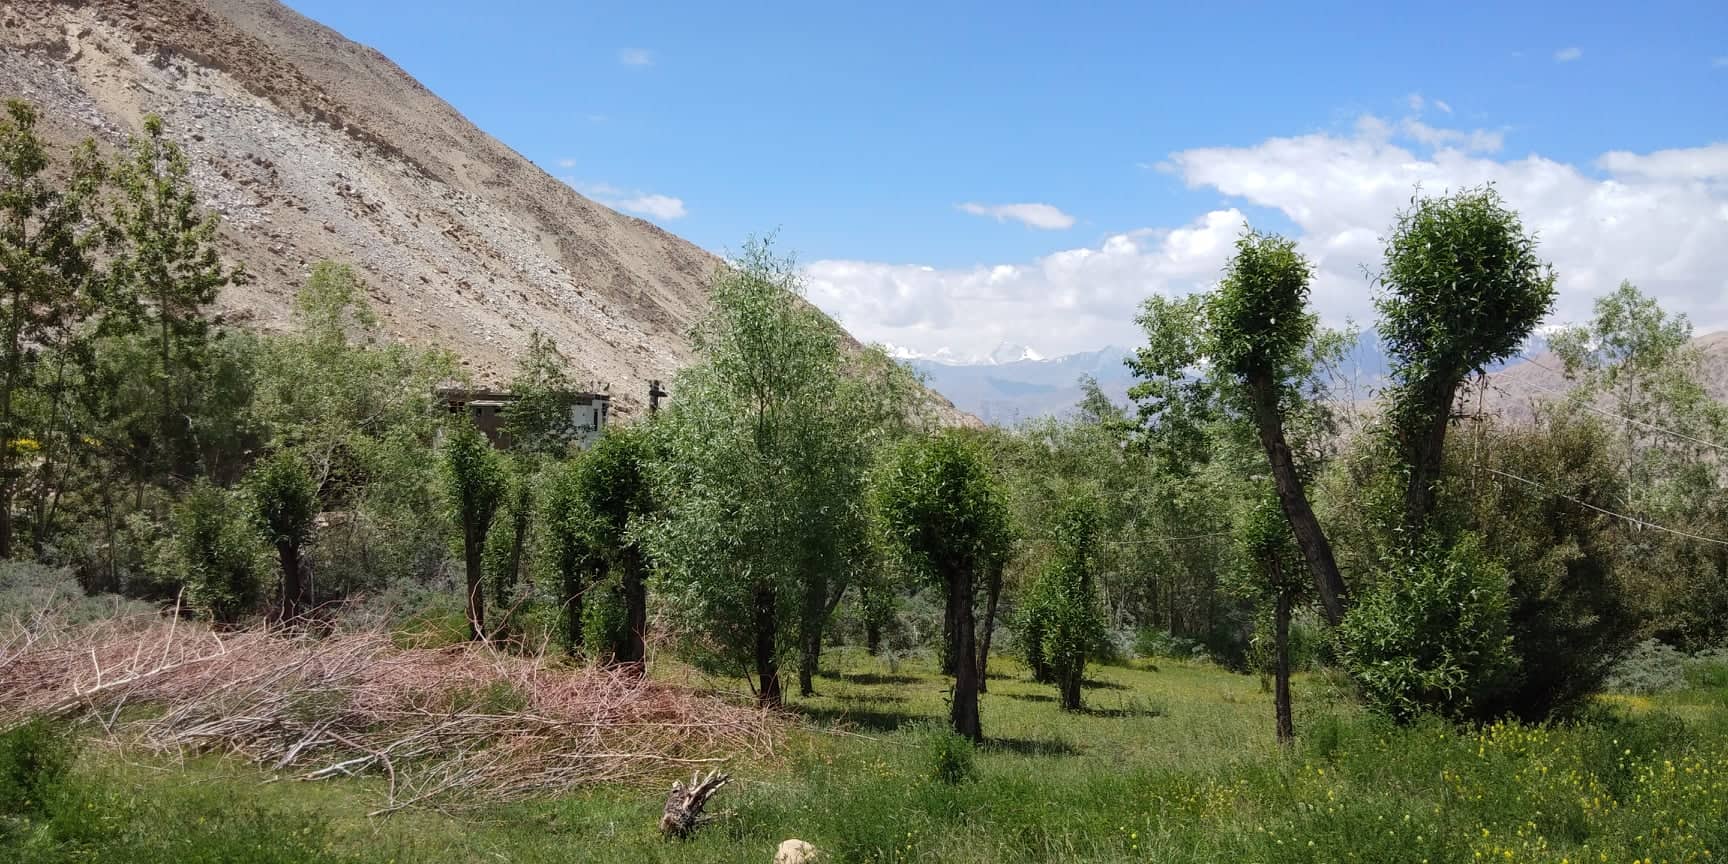 A scenic patch of green in a cold desert. Tashi's efforts made this possible. (Source: Tsetan Dolkar)